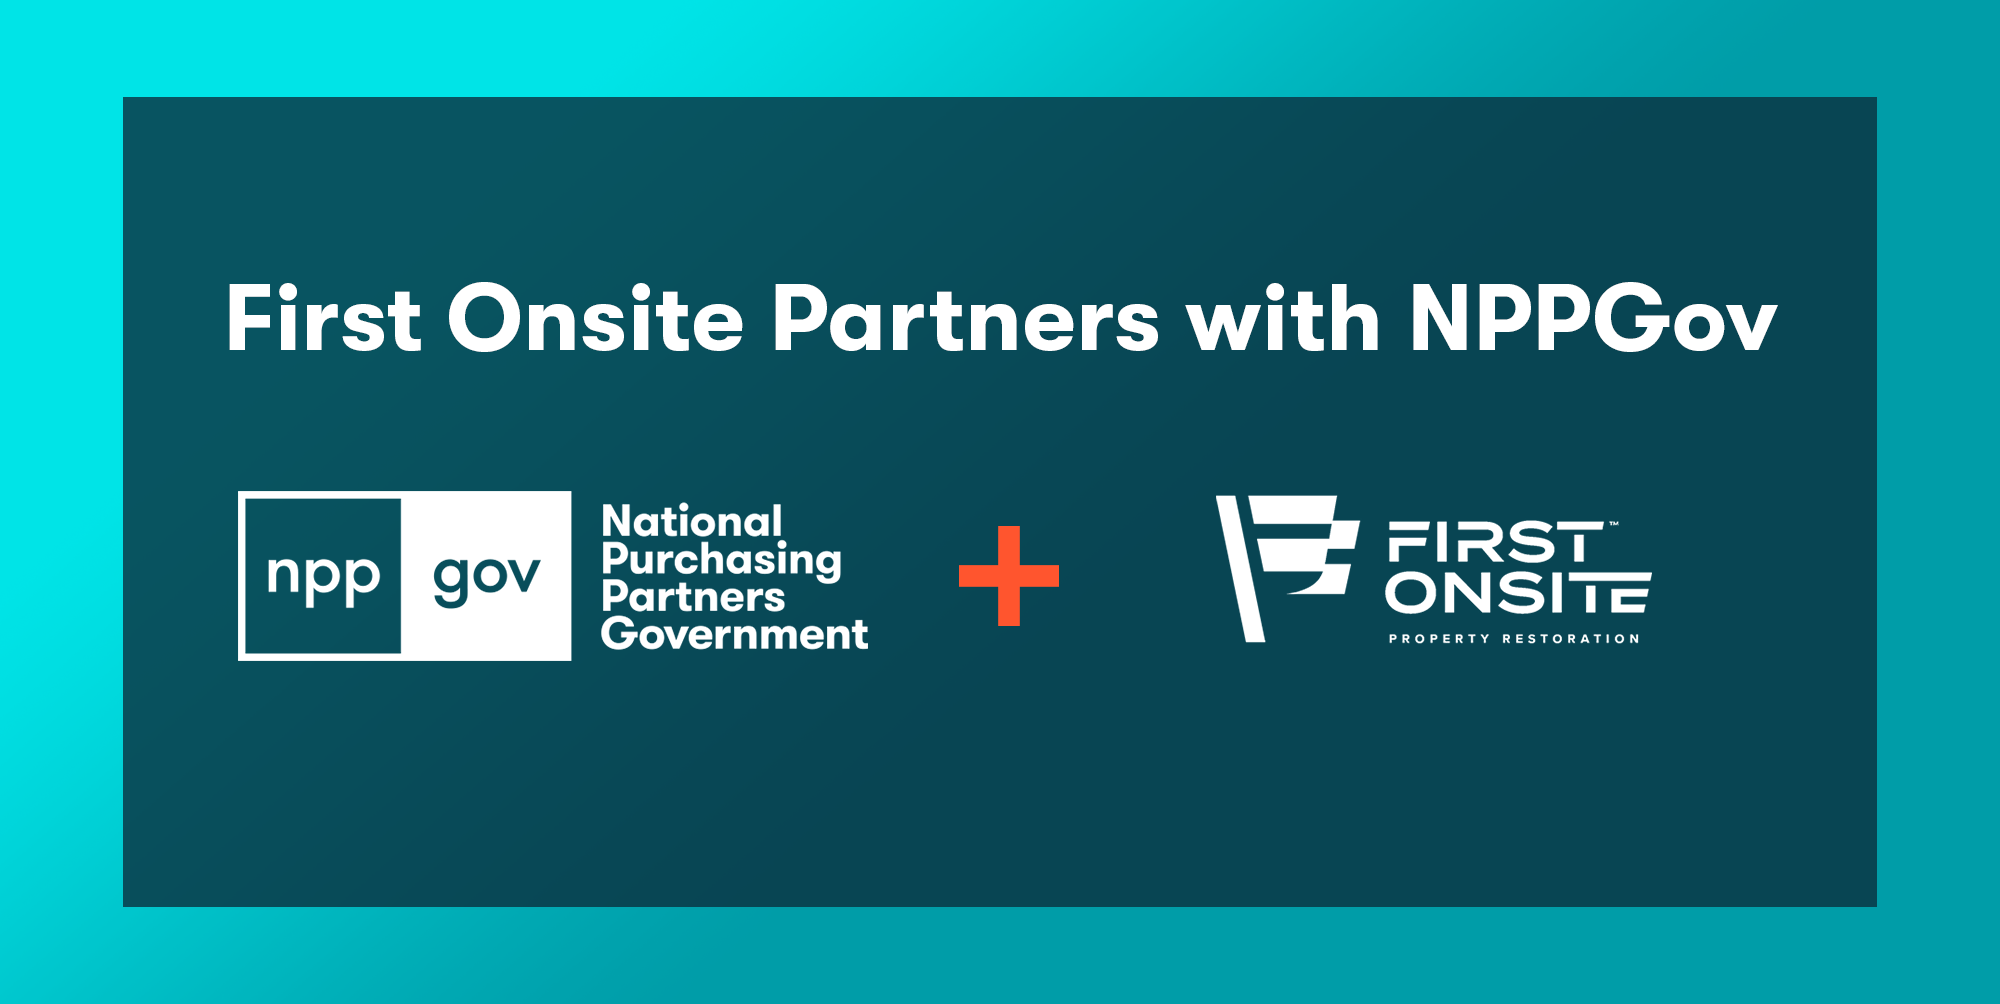 First Onsite Partners with NPPGov